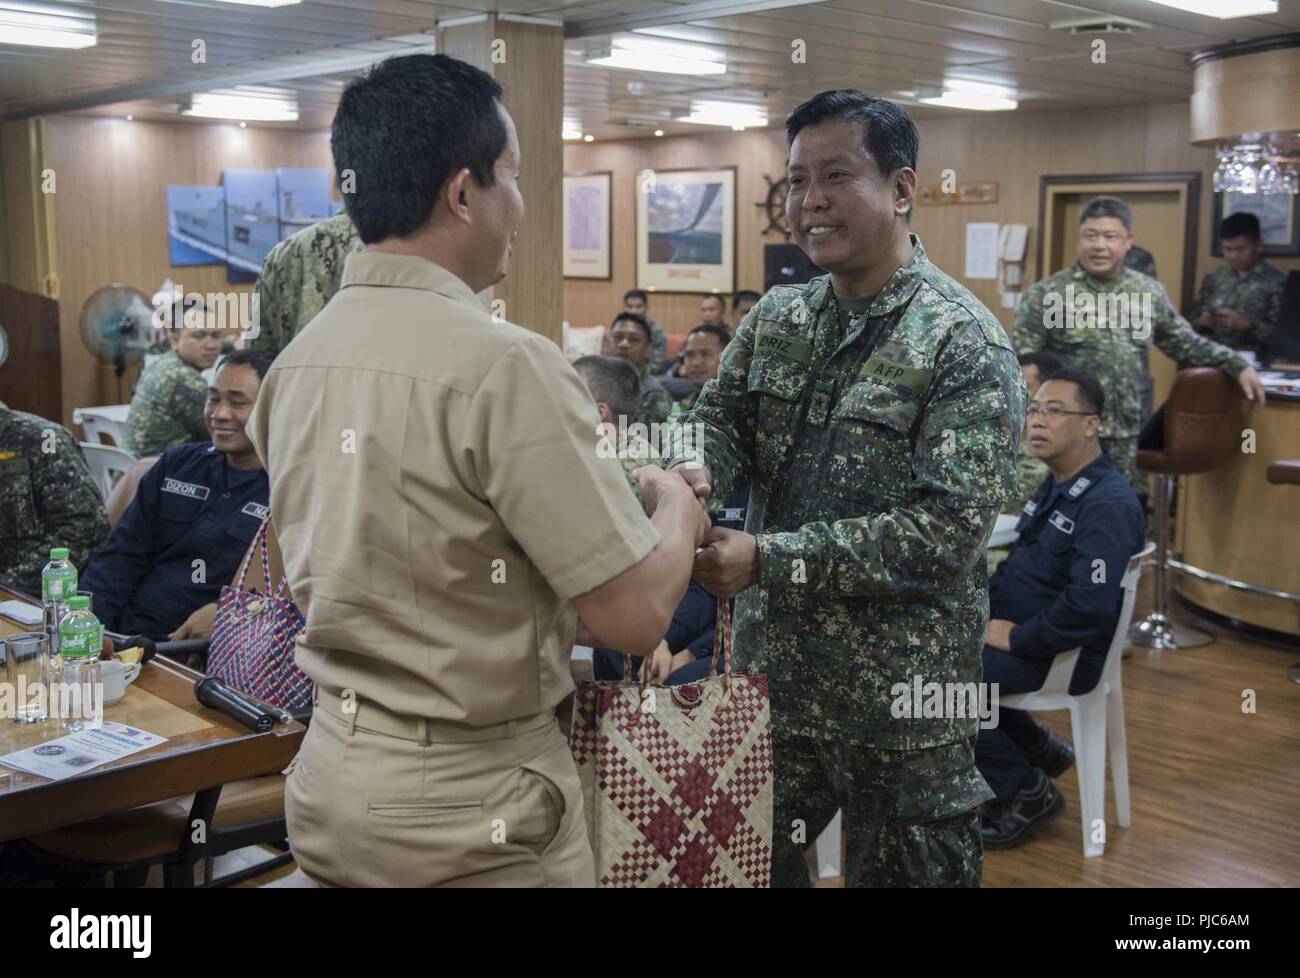 SAN FERNANDO CITY, Philippines (July 14, 2018) Captain Erwin Lao, commanding officer of USNS Millinocket (T-EPF 3), exchanges gifts with Philippine Navy Commodore Nichols Driz, Commander, Naval Forces Northern Luzon, at the closing ceremony of Maritime Training Activity (MTA) Sama Sama 2018 aboard Philippine Navy ship BRP Tarlac (LD-601). The week-long engagement focuses on the full spectrum of naval capabilities and is designed to strengthen the close partnership between both navies while cooperatively ensuring maritime security, stability and prosperity. Stock Photo